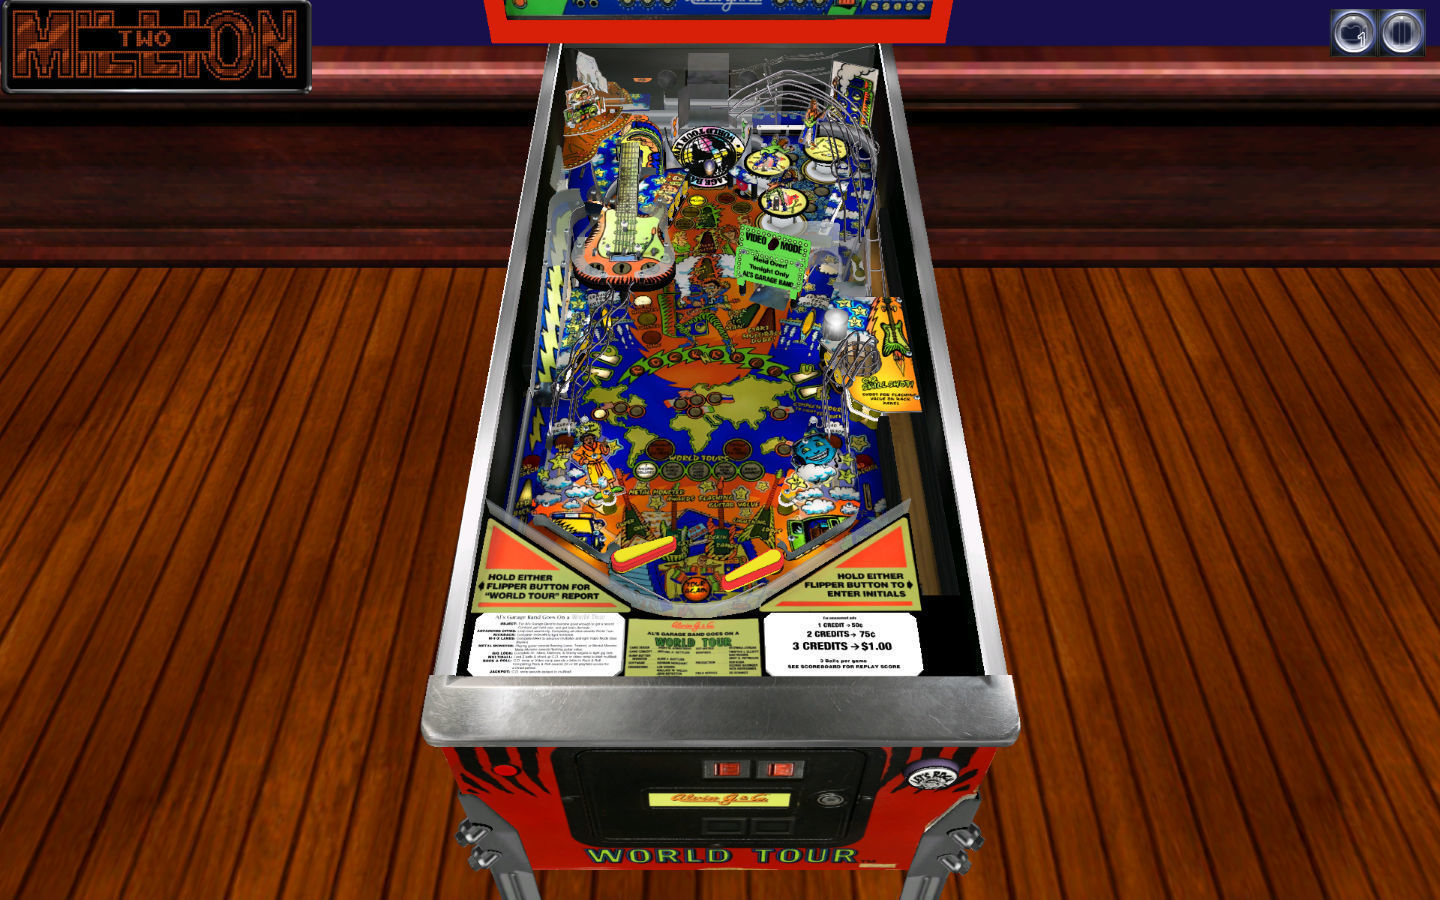 How To Download Classic Pinball Onto Mac